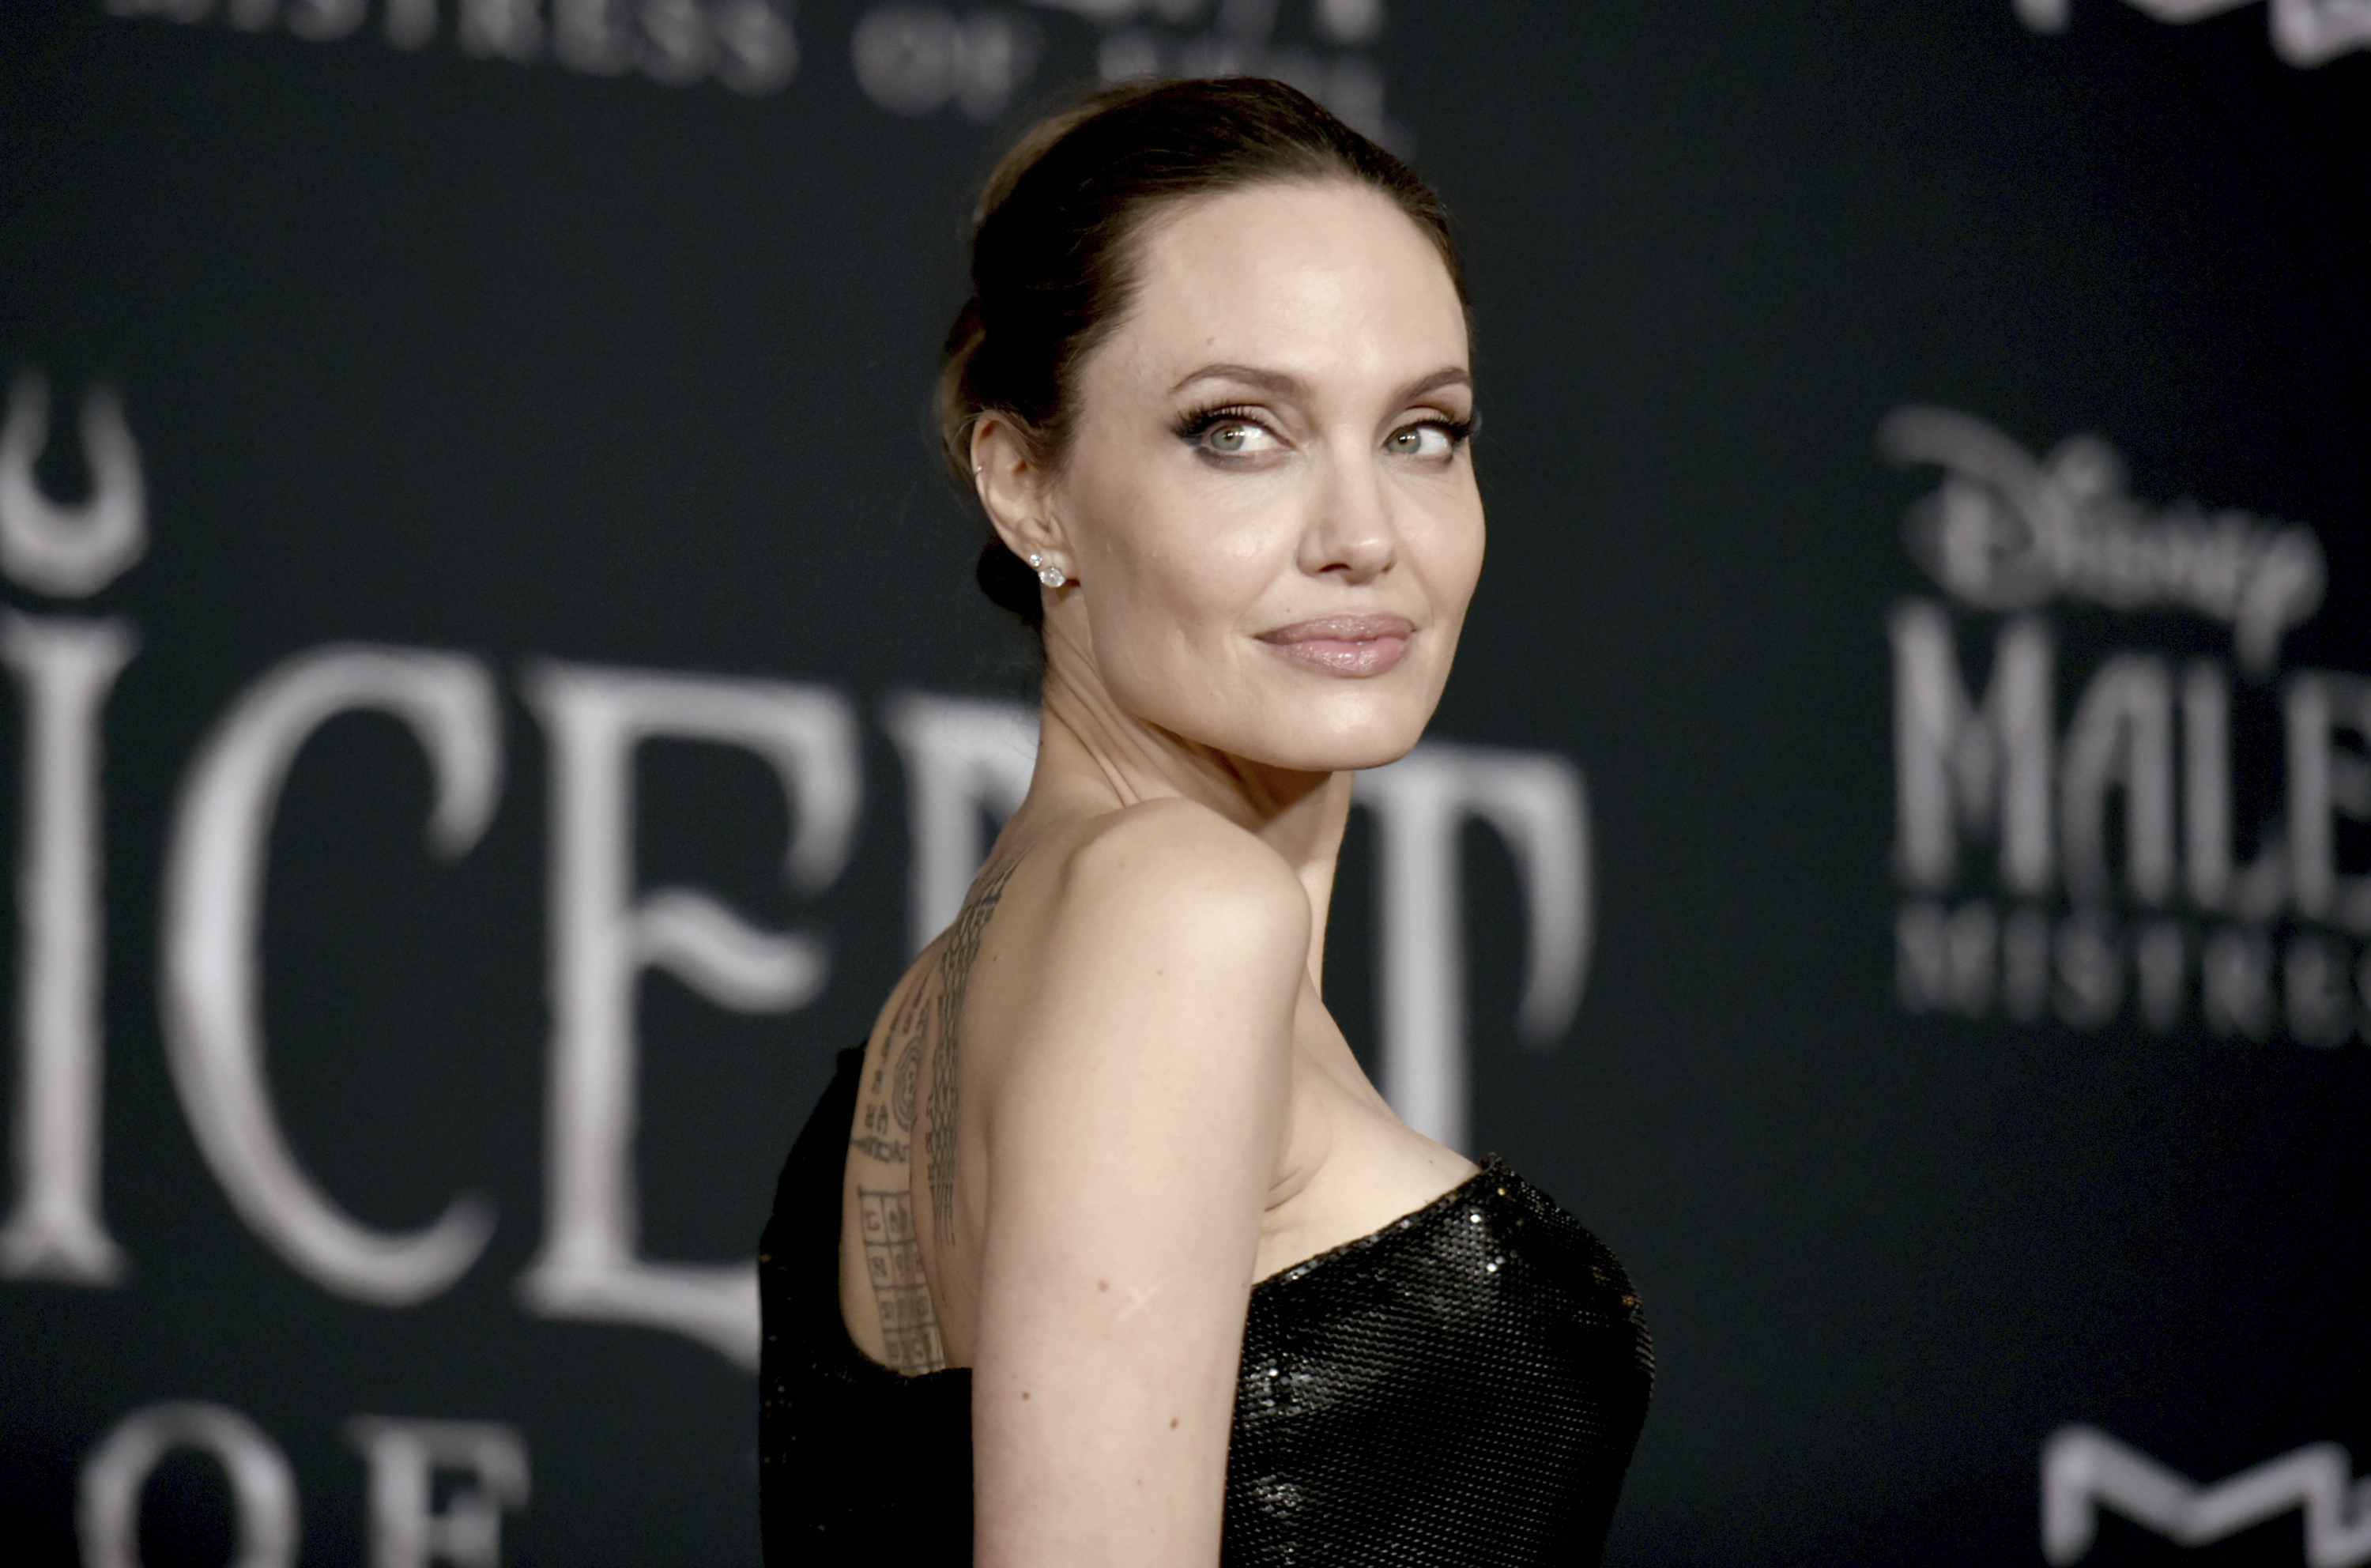 FILE - In this Sept. 30, 2019, file photo, Angelina Jolie arrives at a premiere at the El Capitan Theatre in Los Angeles. Jolie criticized a judge deciding on custody arrangements for her and Brad Pitt's children during their divorce, saying in a court filing on Monday, May 24, 2021, that the judge refused to allow their kids to testify. (Photo by Richard Shotwell/Invision/AP)